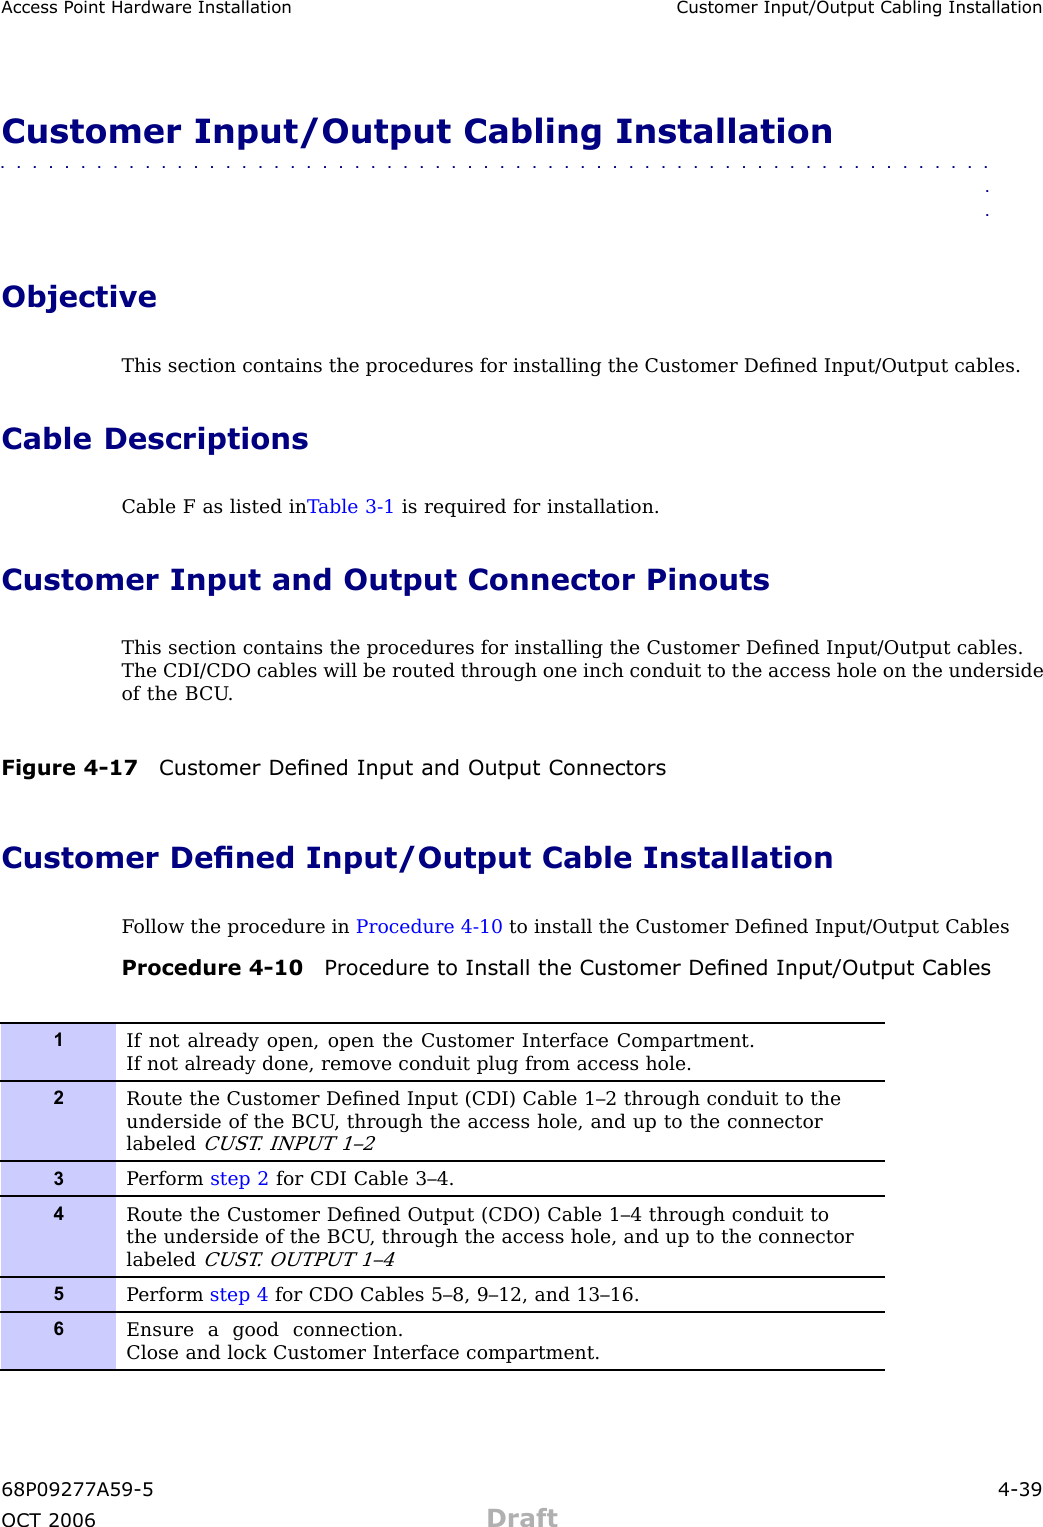 Access P oint Hardw are Installation Customer Input/Output Cabling InstallationCustomer Input/Output Cabling Installation■■■■■■■■■■■■■■■■■■■■■■■■■■■■■■■■■■■■■■■■■■■■■■■■■■■■■■■■■■■■■■■■ObjectiveThis section contains the procedures for installing the Customer Deﬁned Input/Output cables.Cable DescriptionsCable F as listed in T able 3 -1 is required for installation.Customer Input and Output Connector PinoutsThis section contains the procedures for installing the Customer Deﬁned Input/Output cables.The CDI/CDO cables will be routed through one inch conduit to the access hole on the undersideof the B CU .Figure 4 -17 Customer Dened Input and Output ConnectorsCustomer Dened Input/Output Cable InstallationF ollow the procedure in Procedure 4 -10 to install the Customer Deﬁned Input/Output CablesProcedure 4 -10 Procedure to Install the Customer Dened Input/Output Cables1If not already open, open the Customer Interface Compartment.If not already done, remove conduit plug from access hole.2Route the Customer Deﬁned Input (CDI) Cable 1–2 through conduit to theunderside of the B CU , through the access hole, and up to the connectorlabeledCUST . INP UT 1–23P erform step 2 for CDI Cable 3–4.4Route the Customer Deﬁned Output (CDO) Cable 1–4 through conduit tothe underside of the B CU , through the access hole, and up to the connectorlabeledCUST . OUTP UT 1–45P erform step 4 for CDO Cables 5–8, 9–12, and 13–16.6Ensure a good connection.Close and lock Customer Interface compartment.68P09277A59 -5 4 -39OCT 2006 Draft